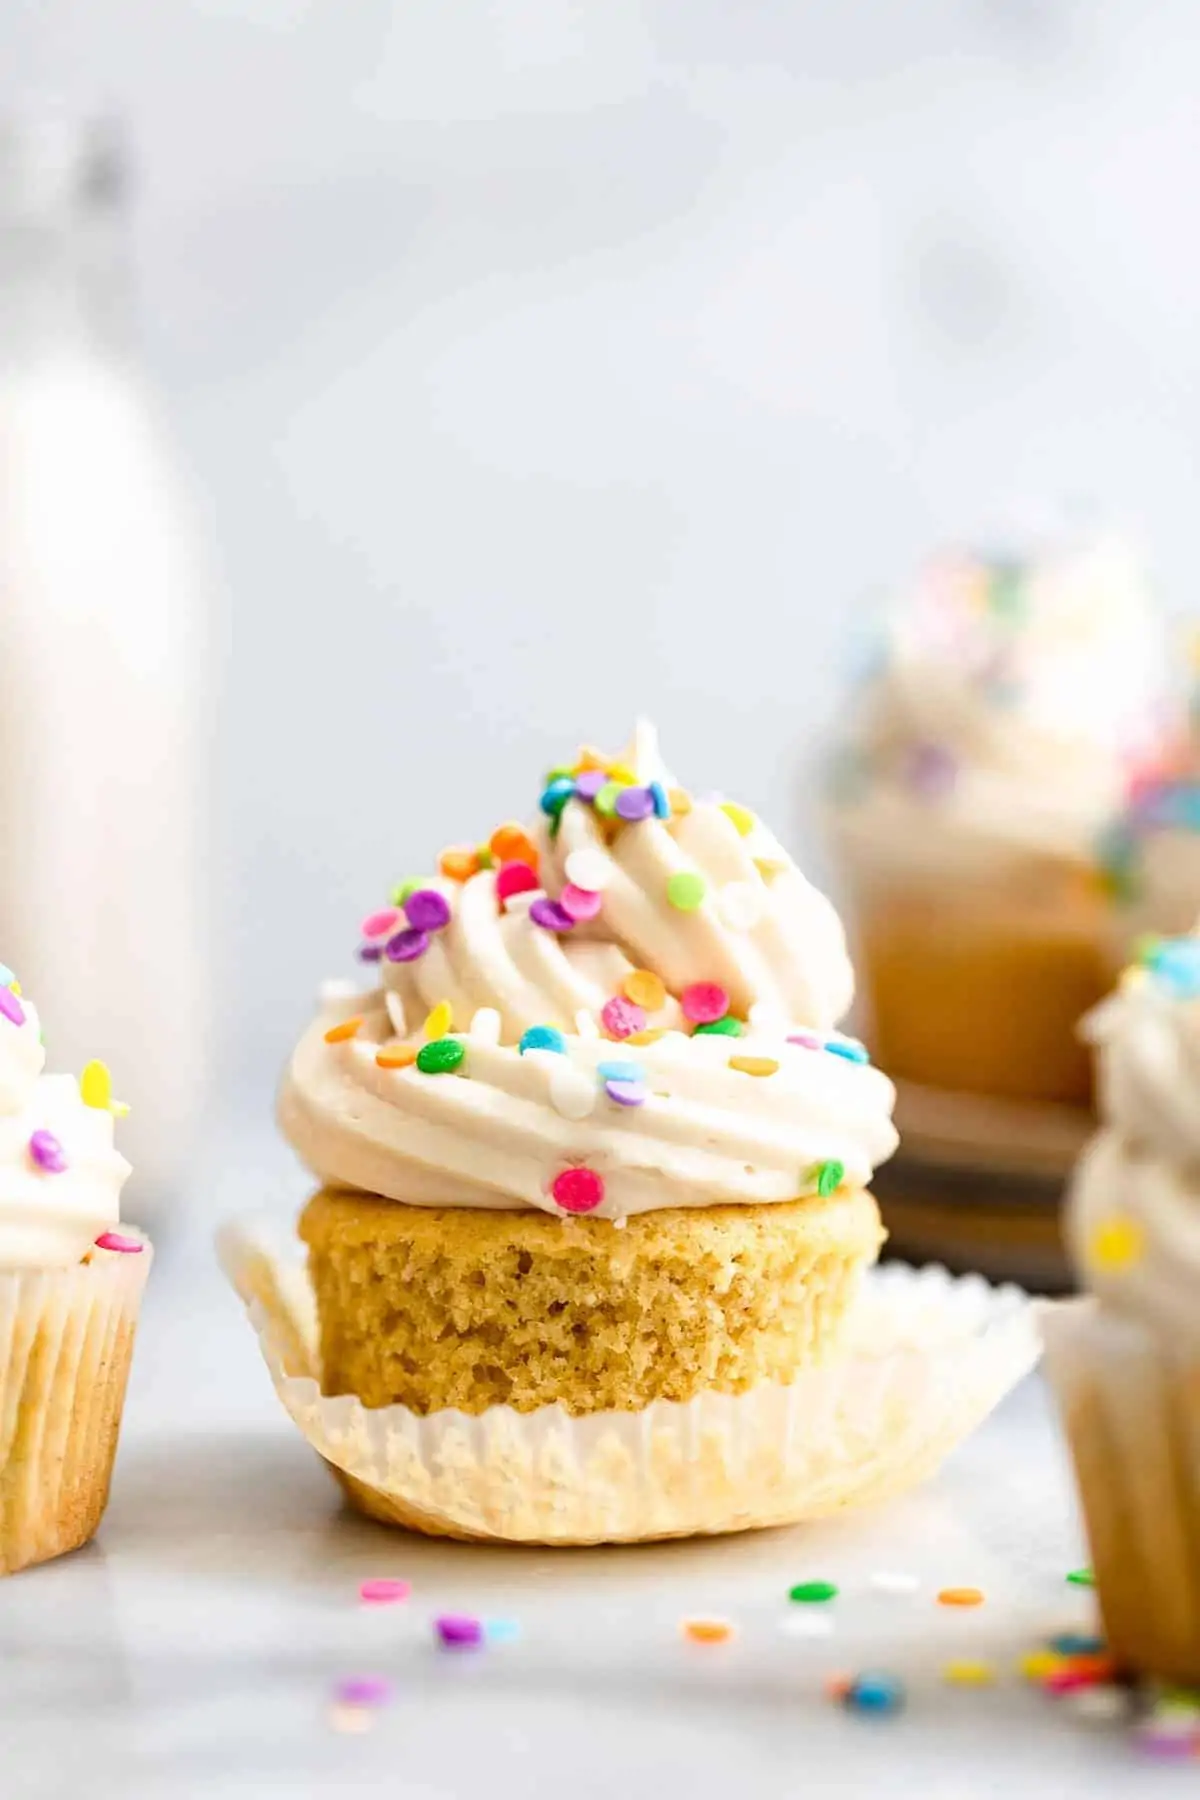 Gluten free vanilla cupcakes with rainbow sprinkles on top with milk in the back.